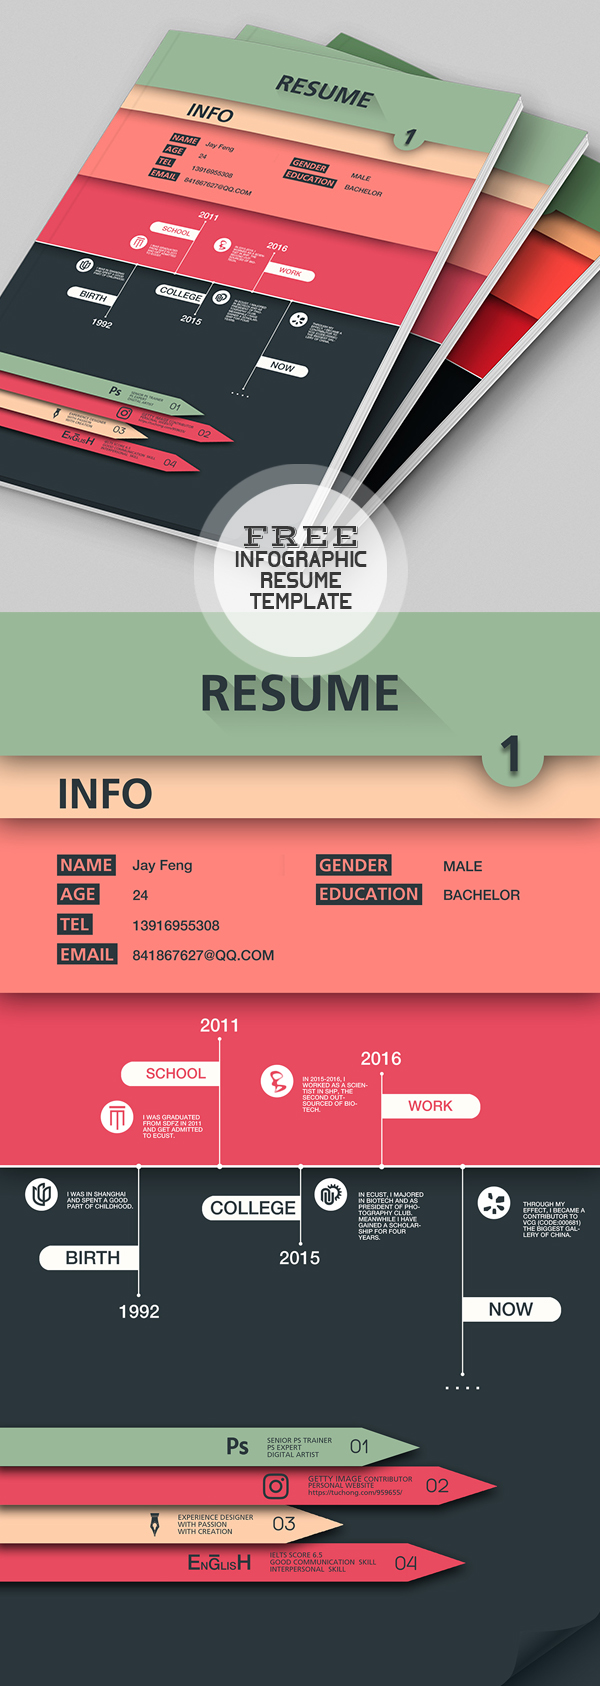 Infographic Style Free Resume Template